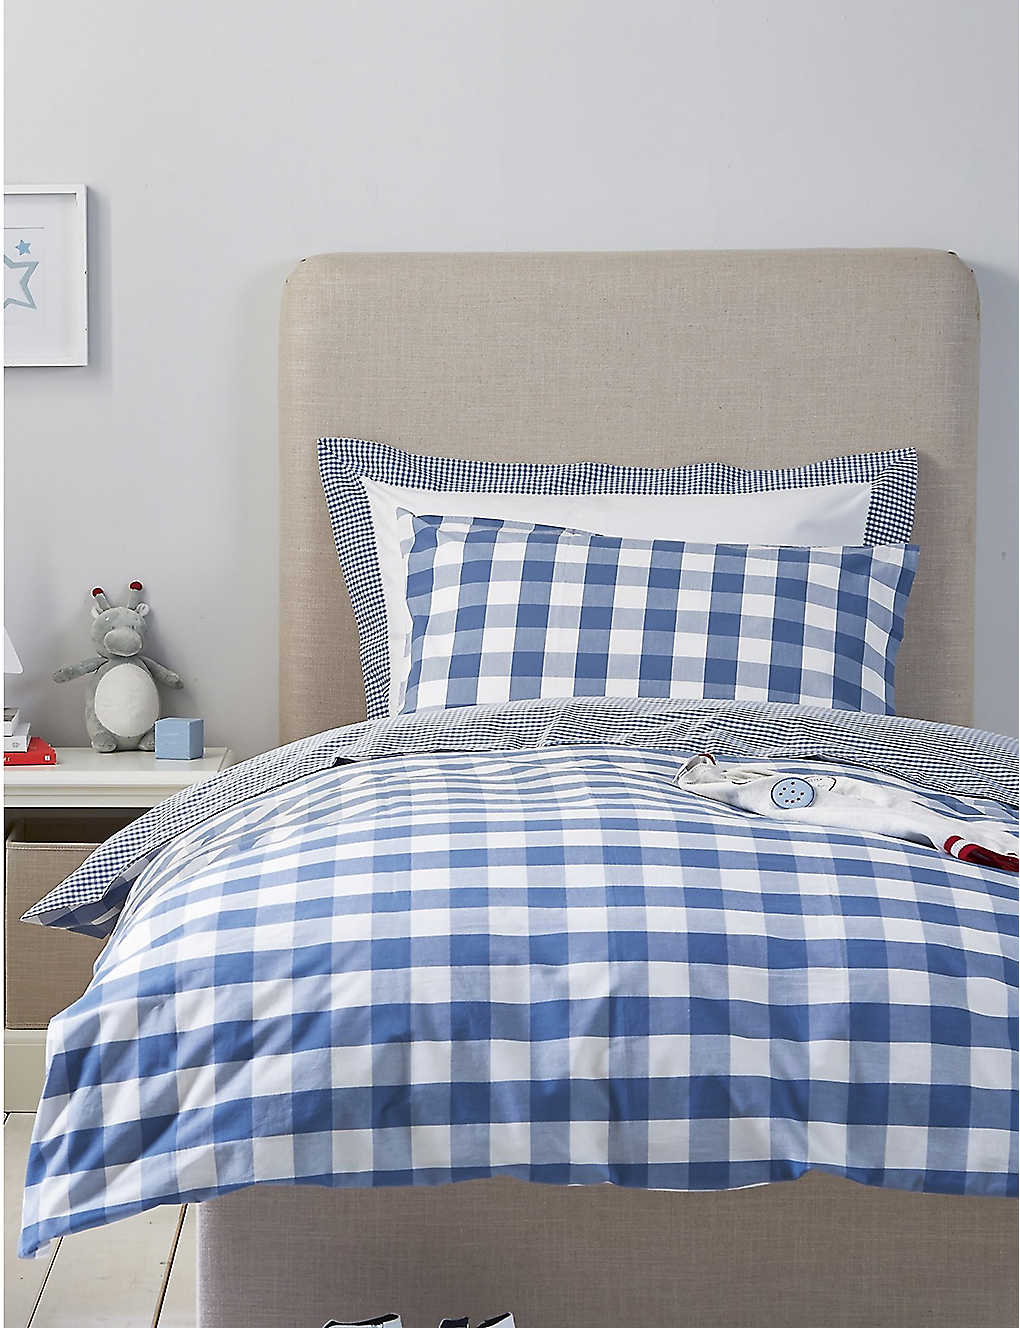 The Little White Company Gingham Print Reversible Single Cotton